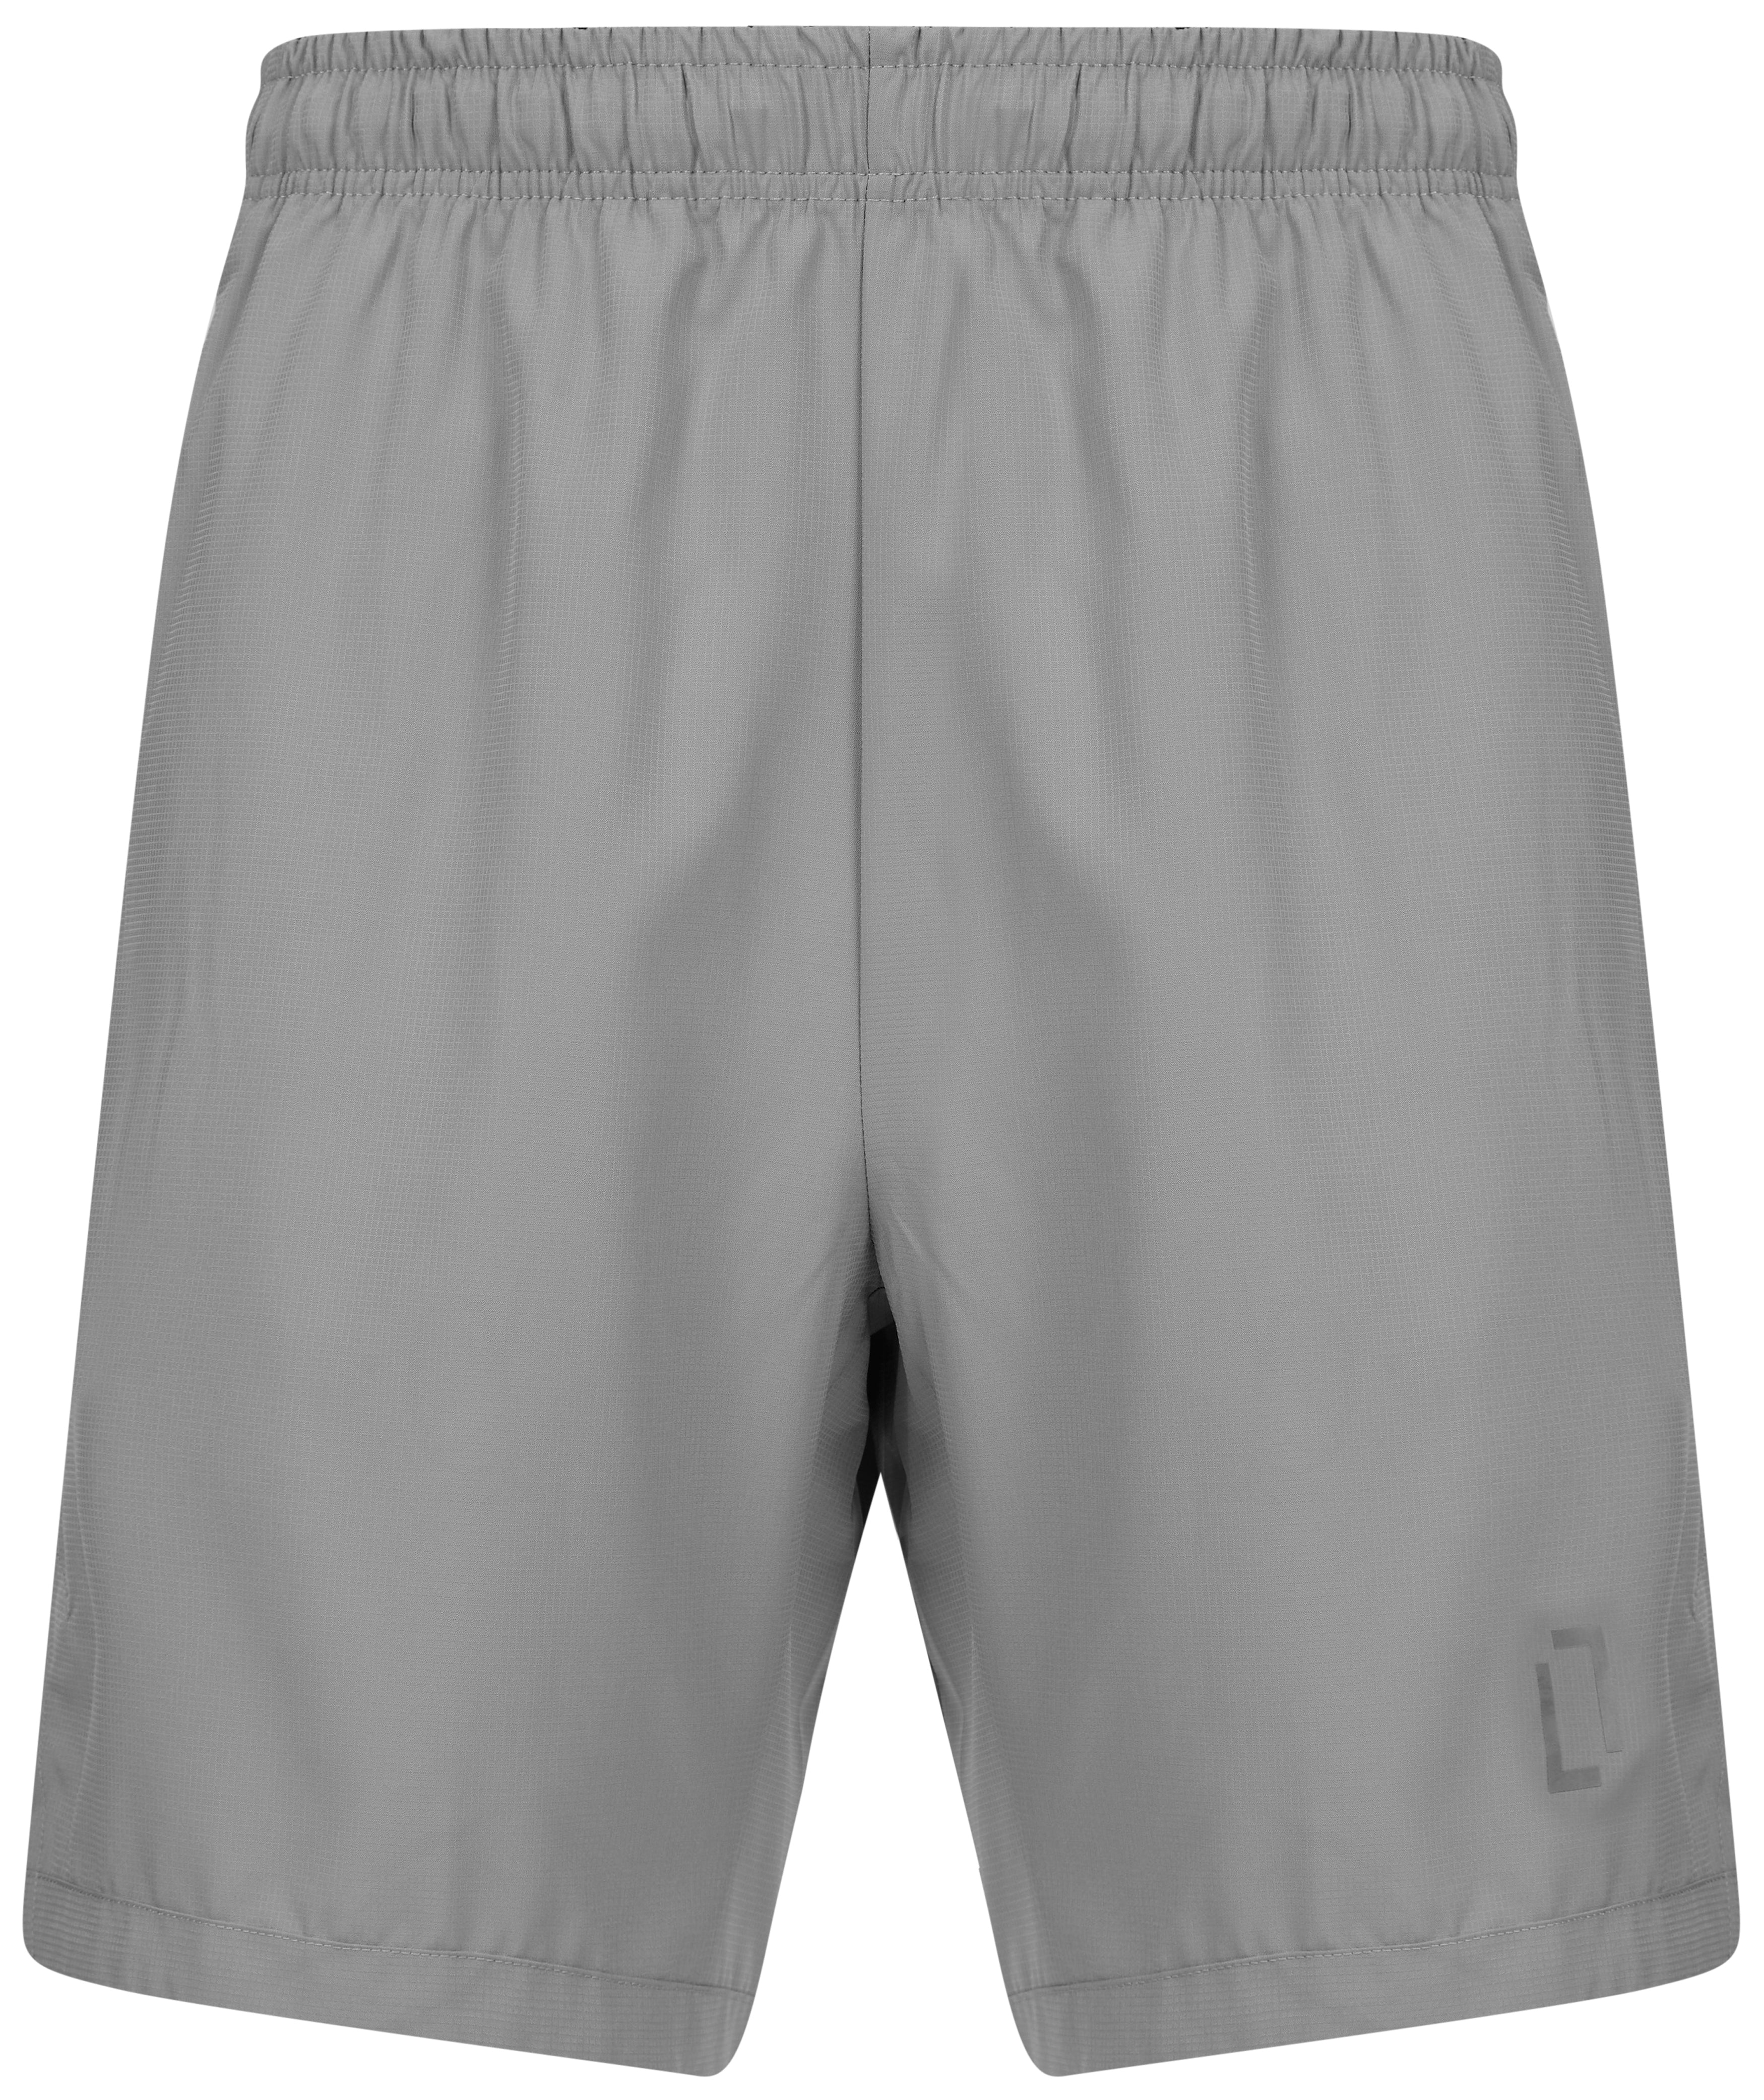 Load image into Gallery viewer, Bulletto Gym Short Grey
